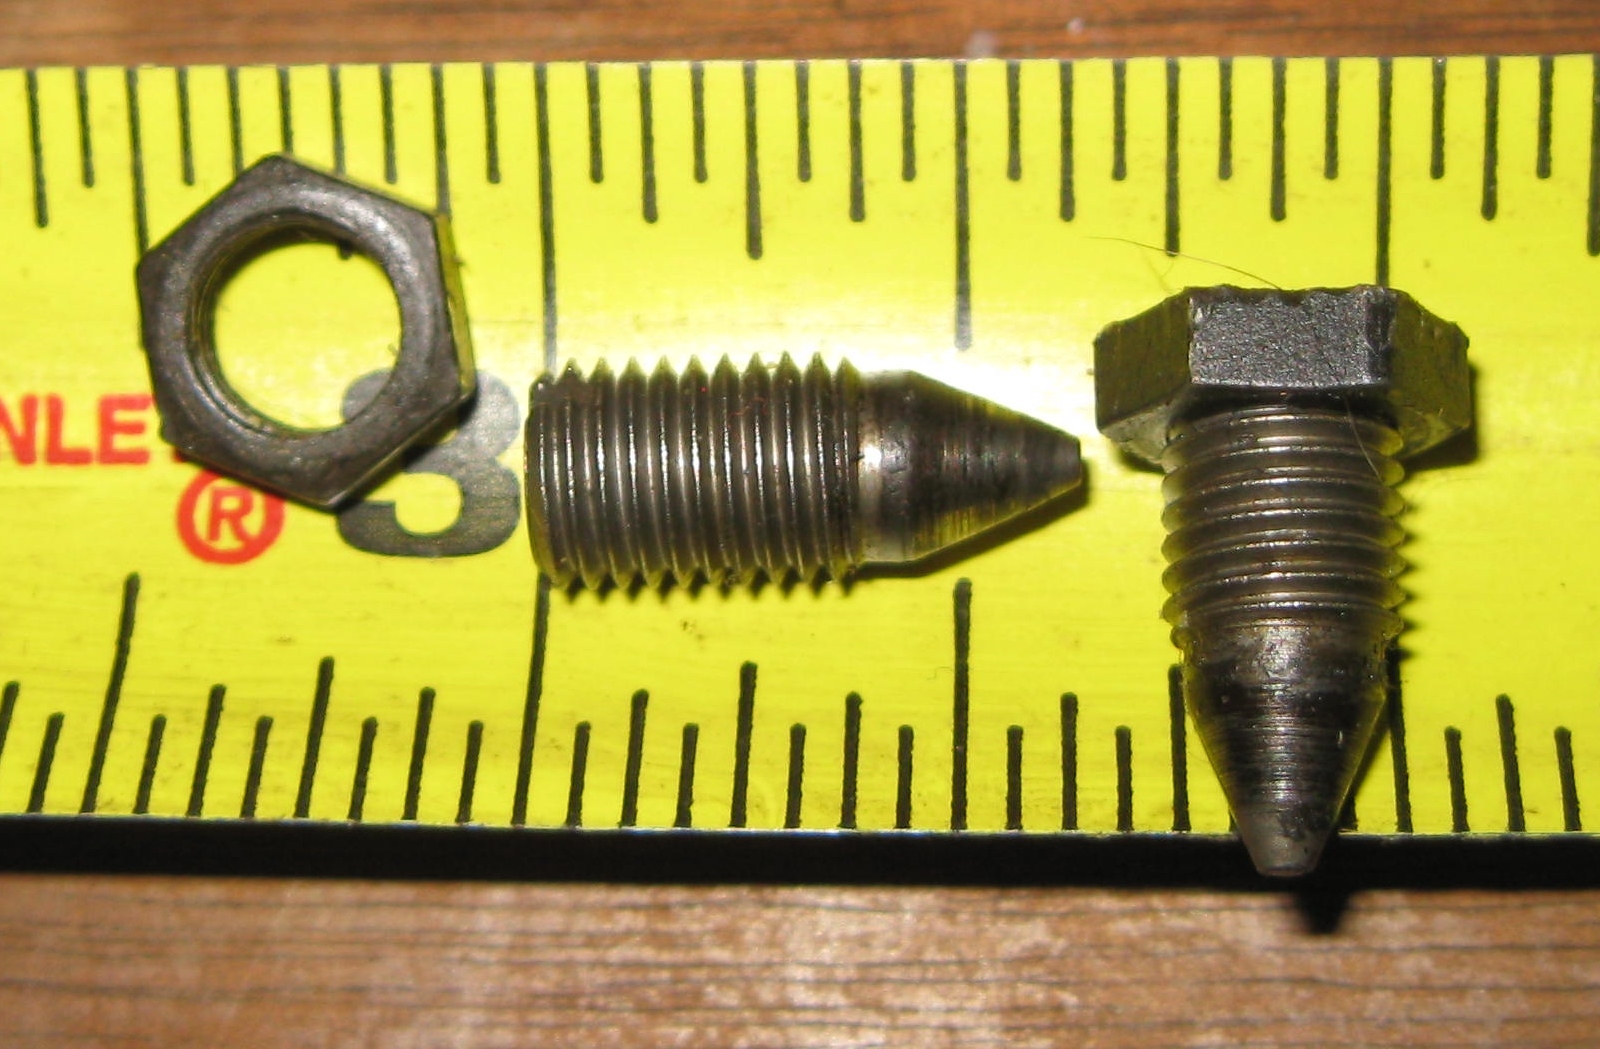 Pair Singer 500A Rocketeer Feed Dog Carrier Screw Centre #315 w/Nuts #1519 - $6.00